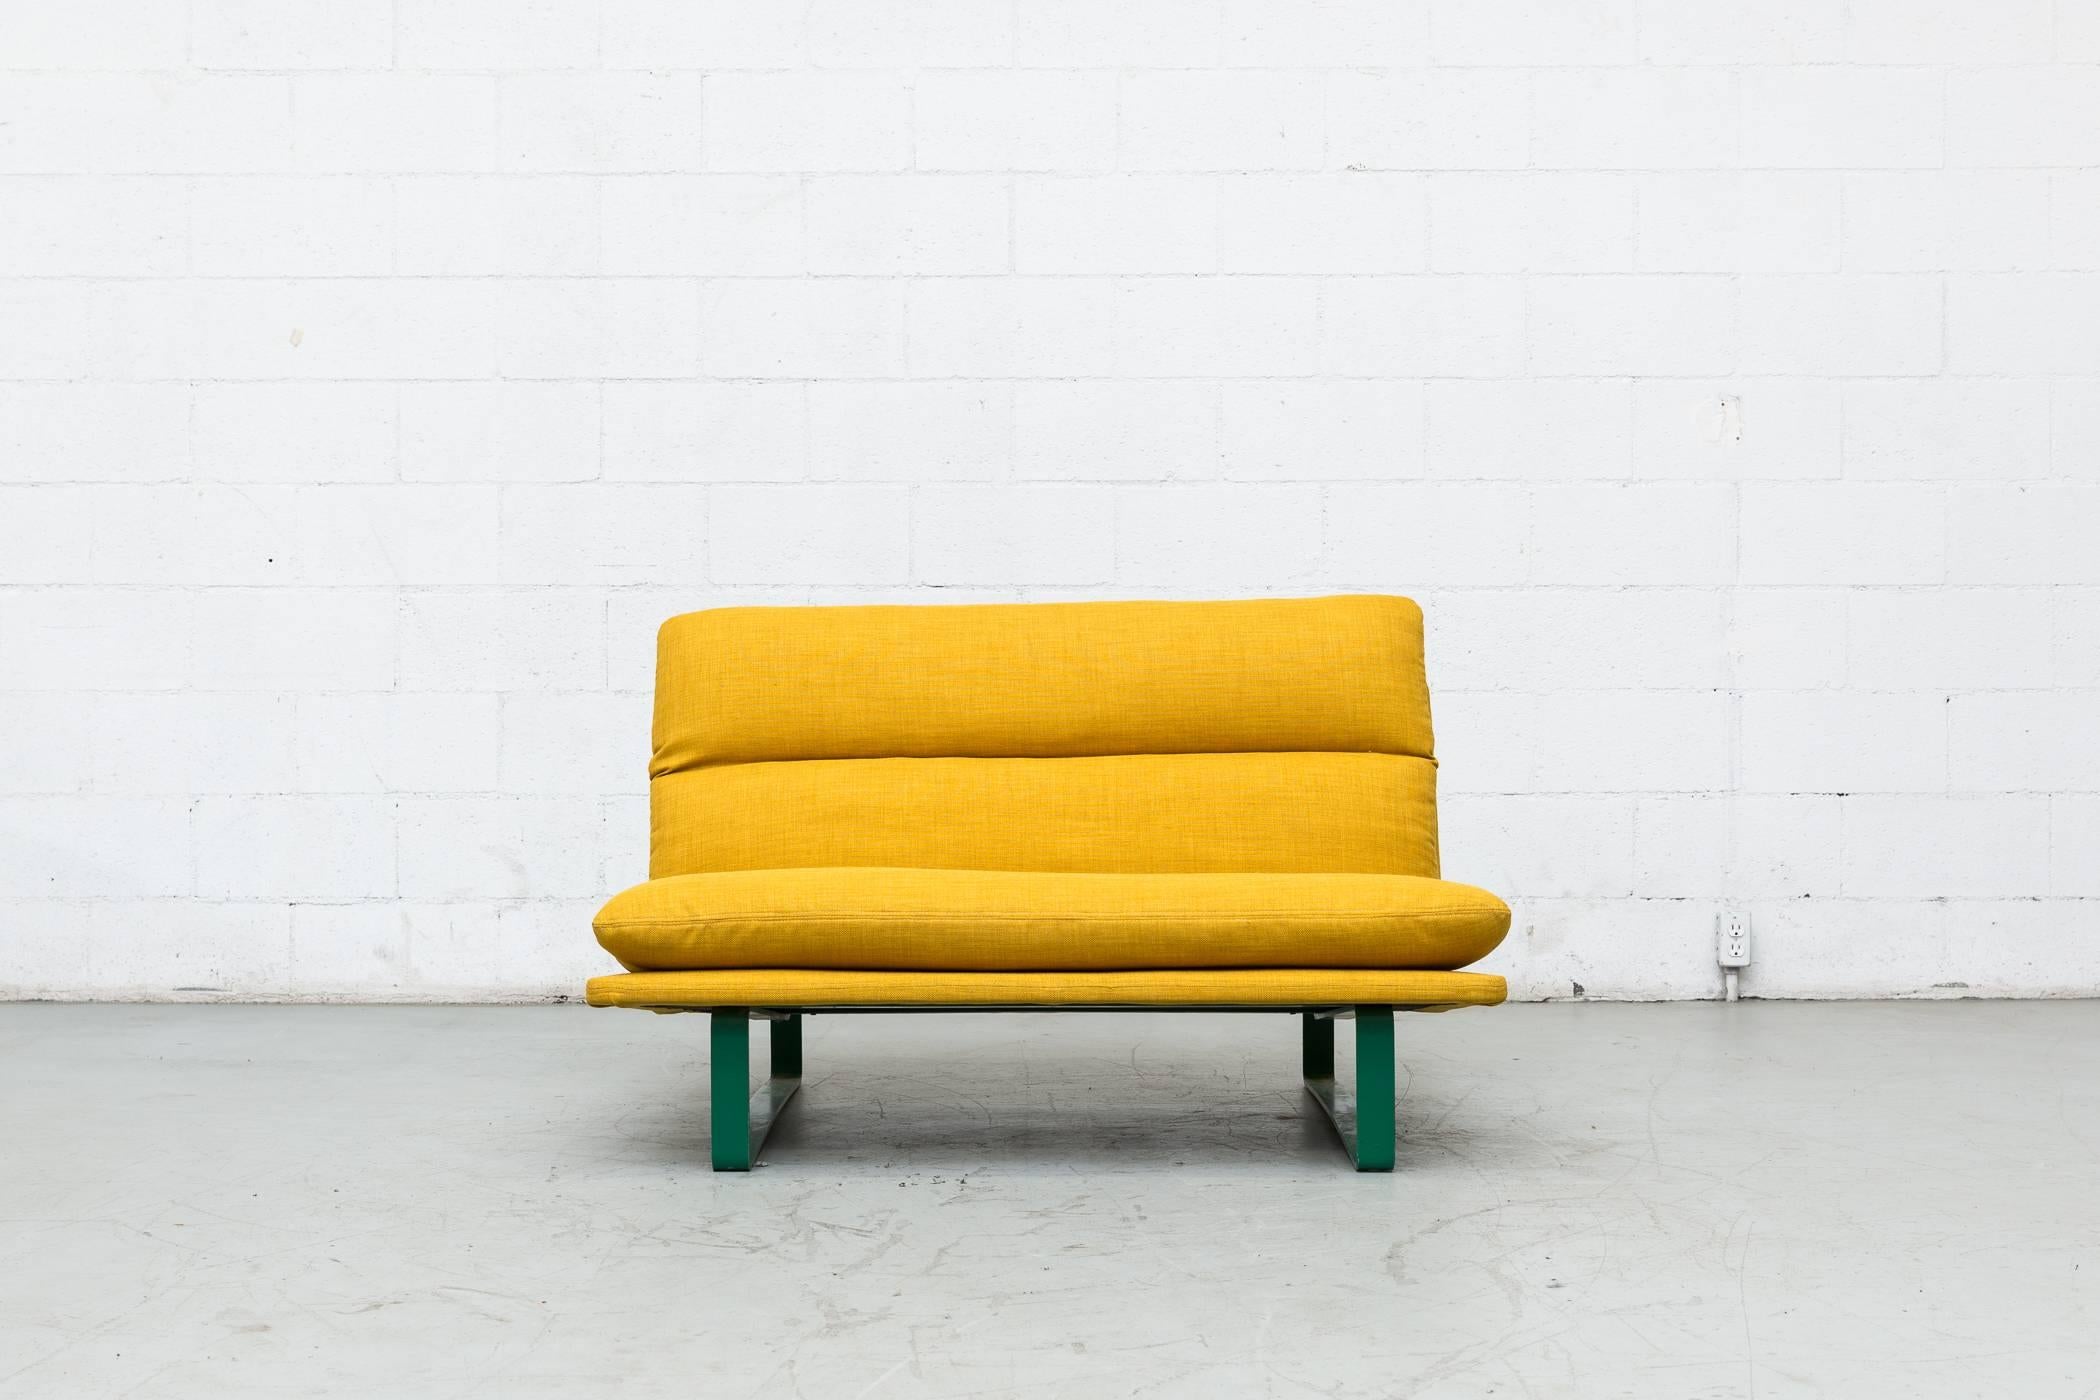 Rare Artifort loveseat with original Kelly green enameled metal base with new sunshine yellow upholstery. Retains original label. Frame in original condition with visible wear.